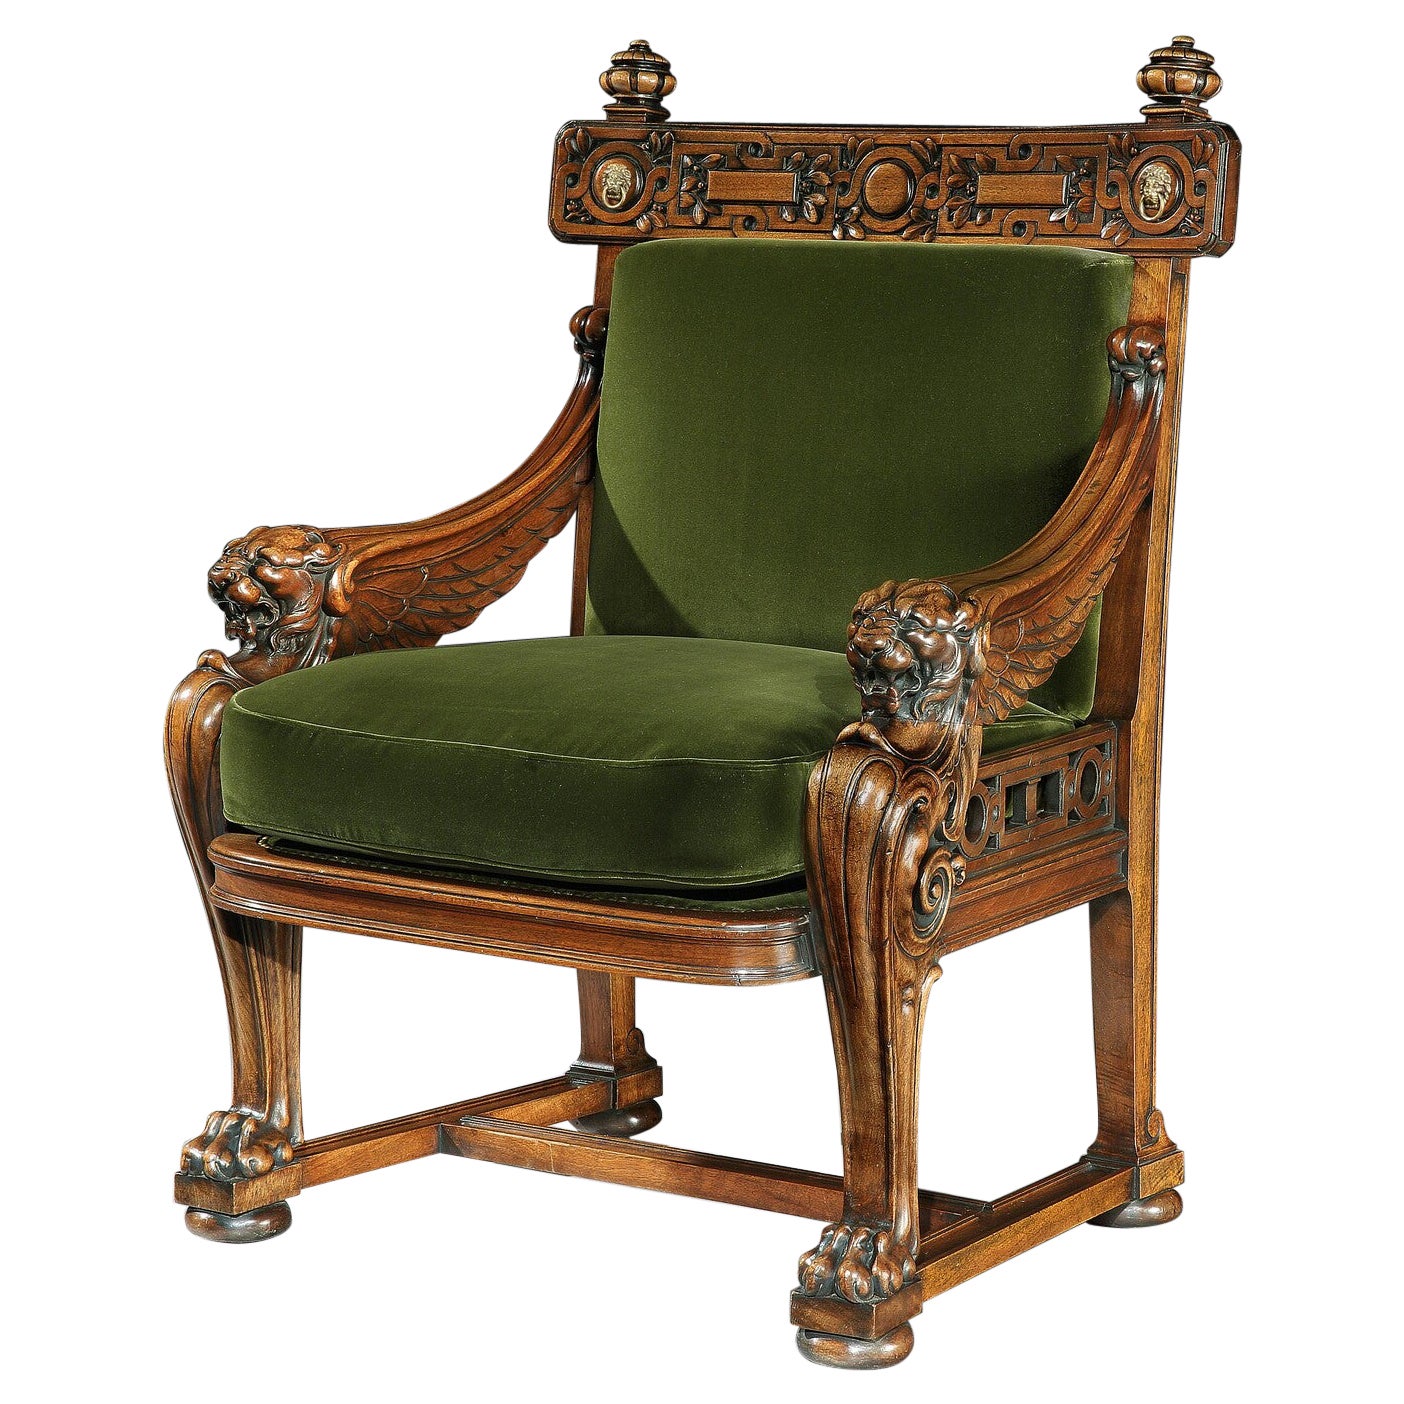 Rare 19th Century Lion Monopodia Armchair After Thomas Hope For Sale